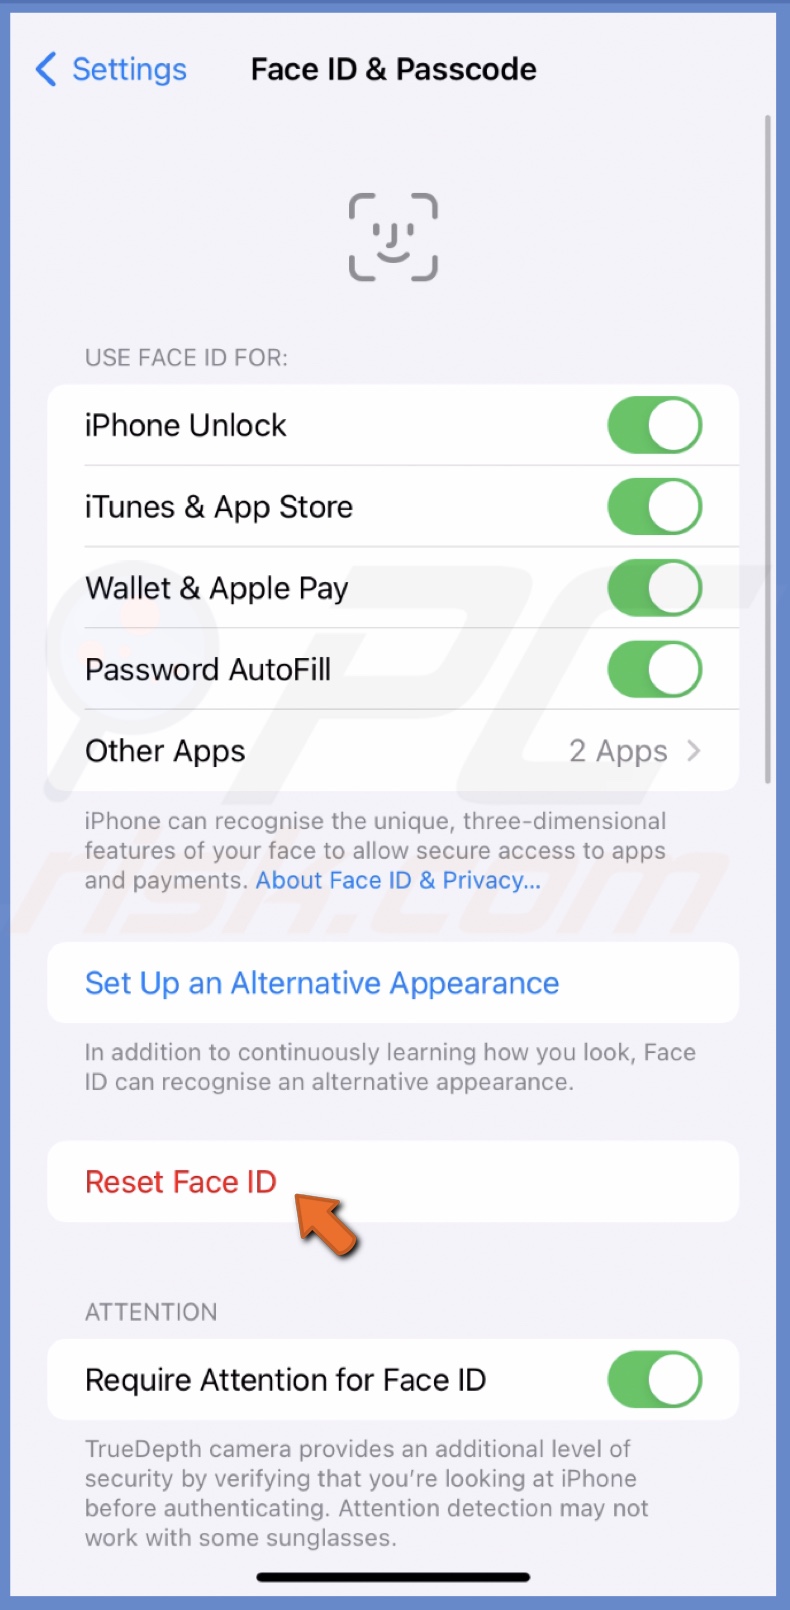 Tap Reset Face ID